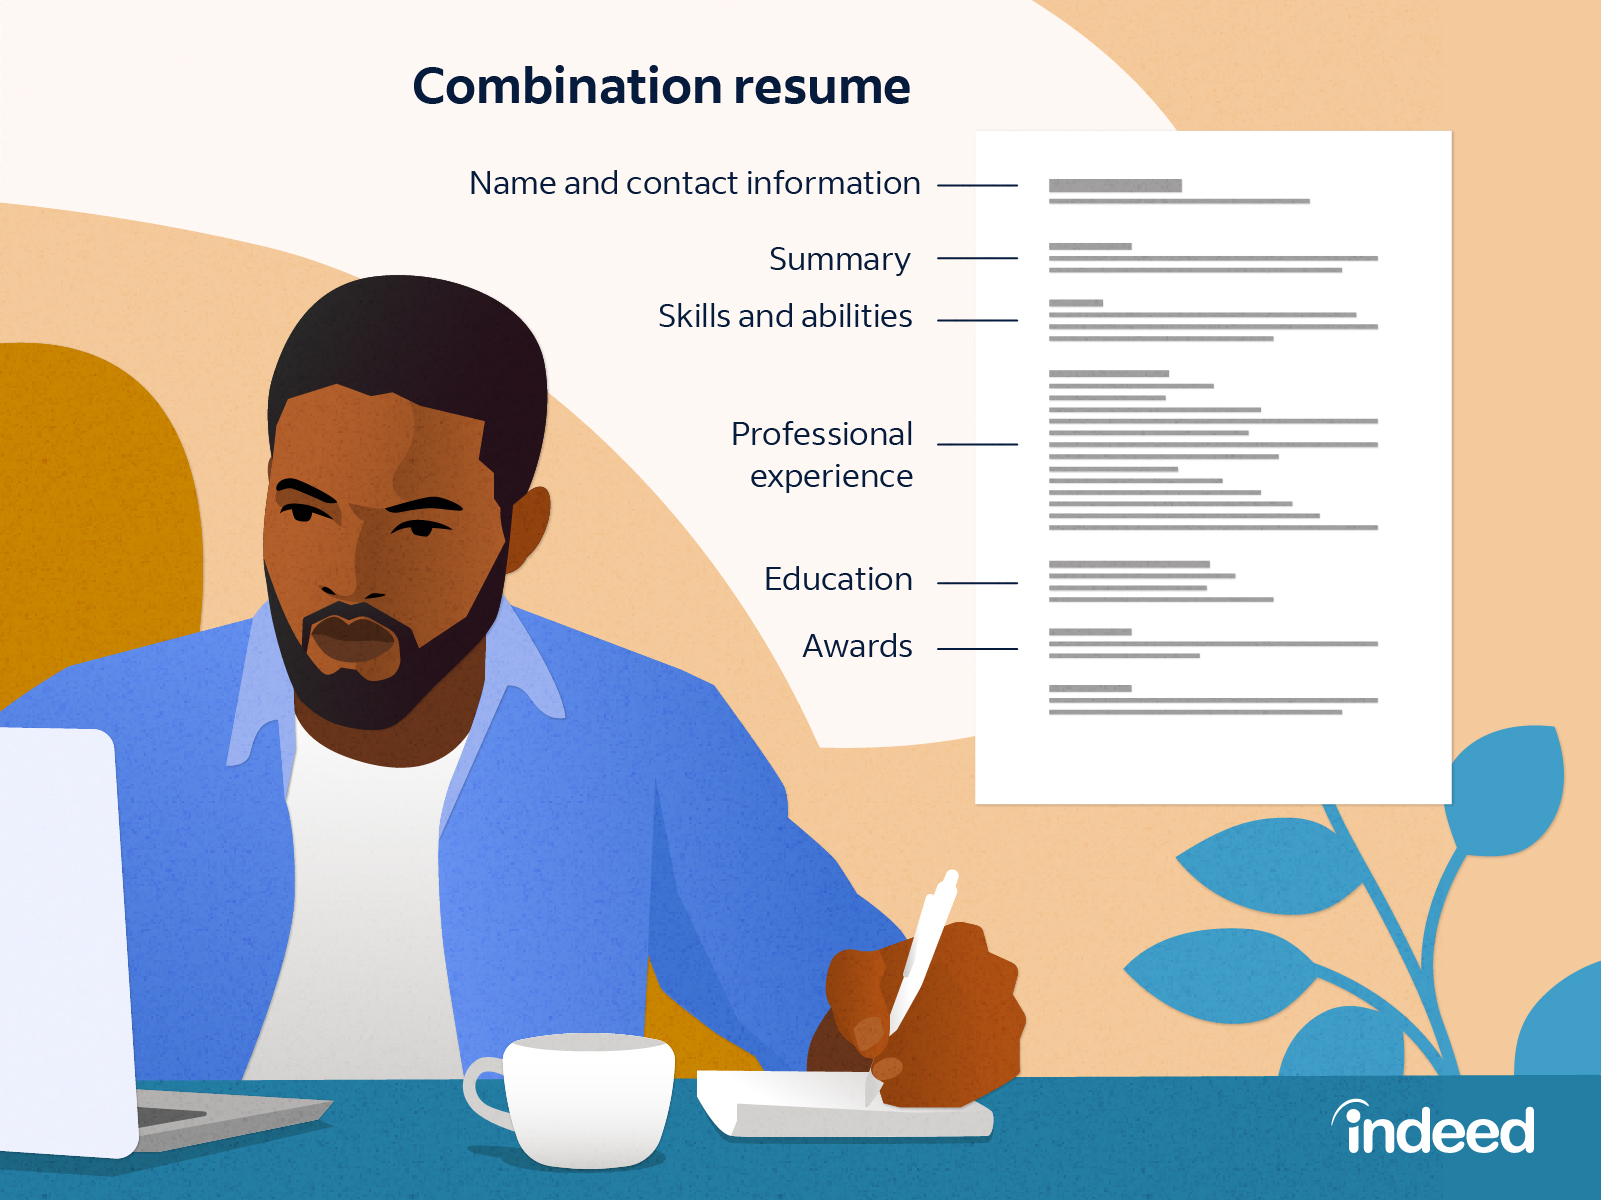 Using O Net Online to help build your resume 